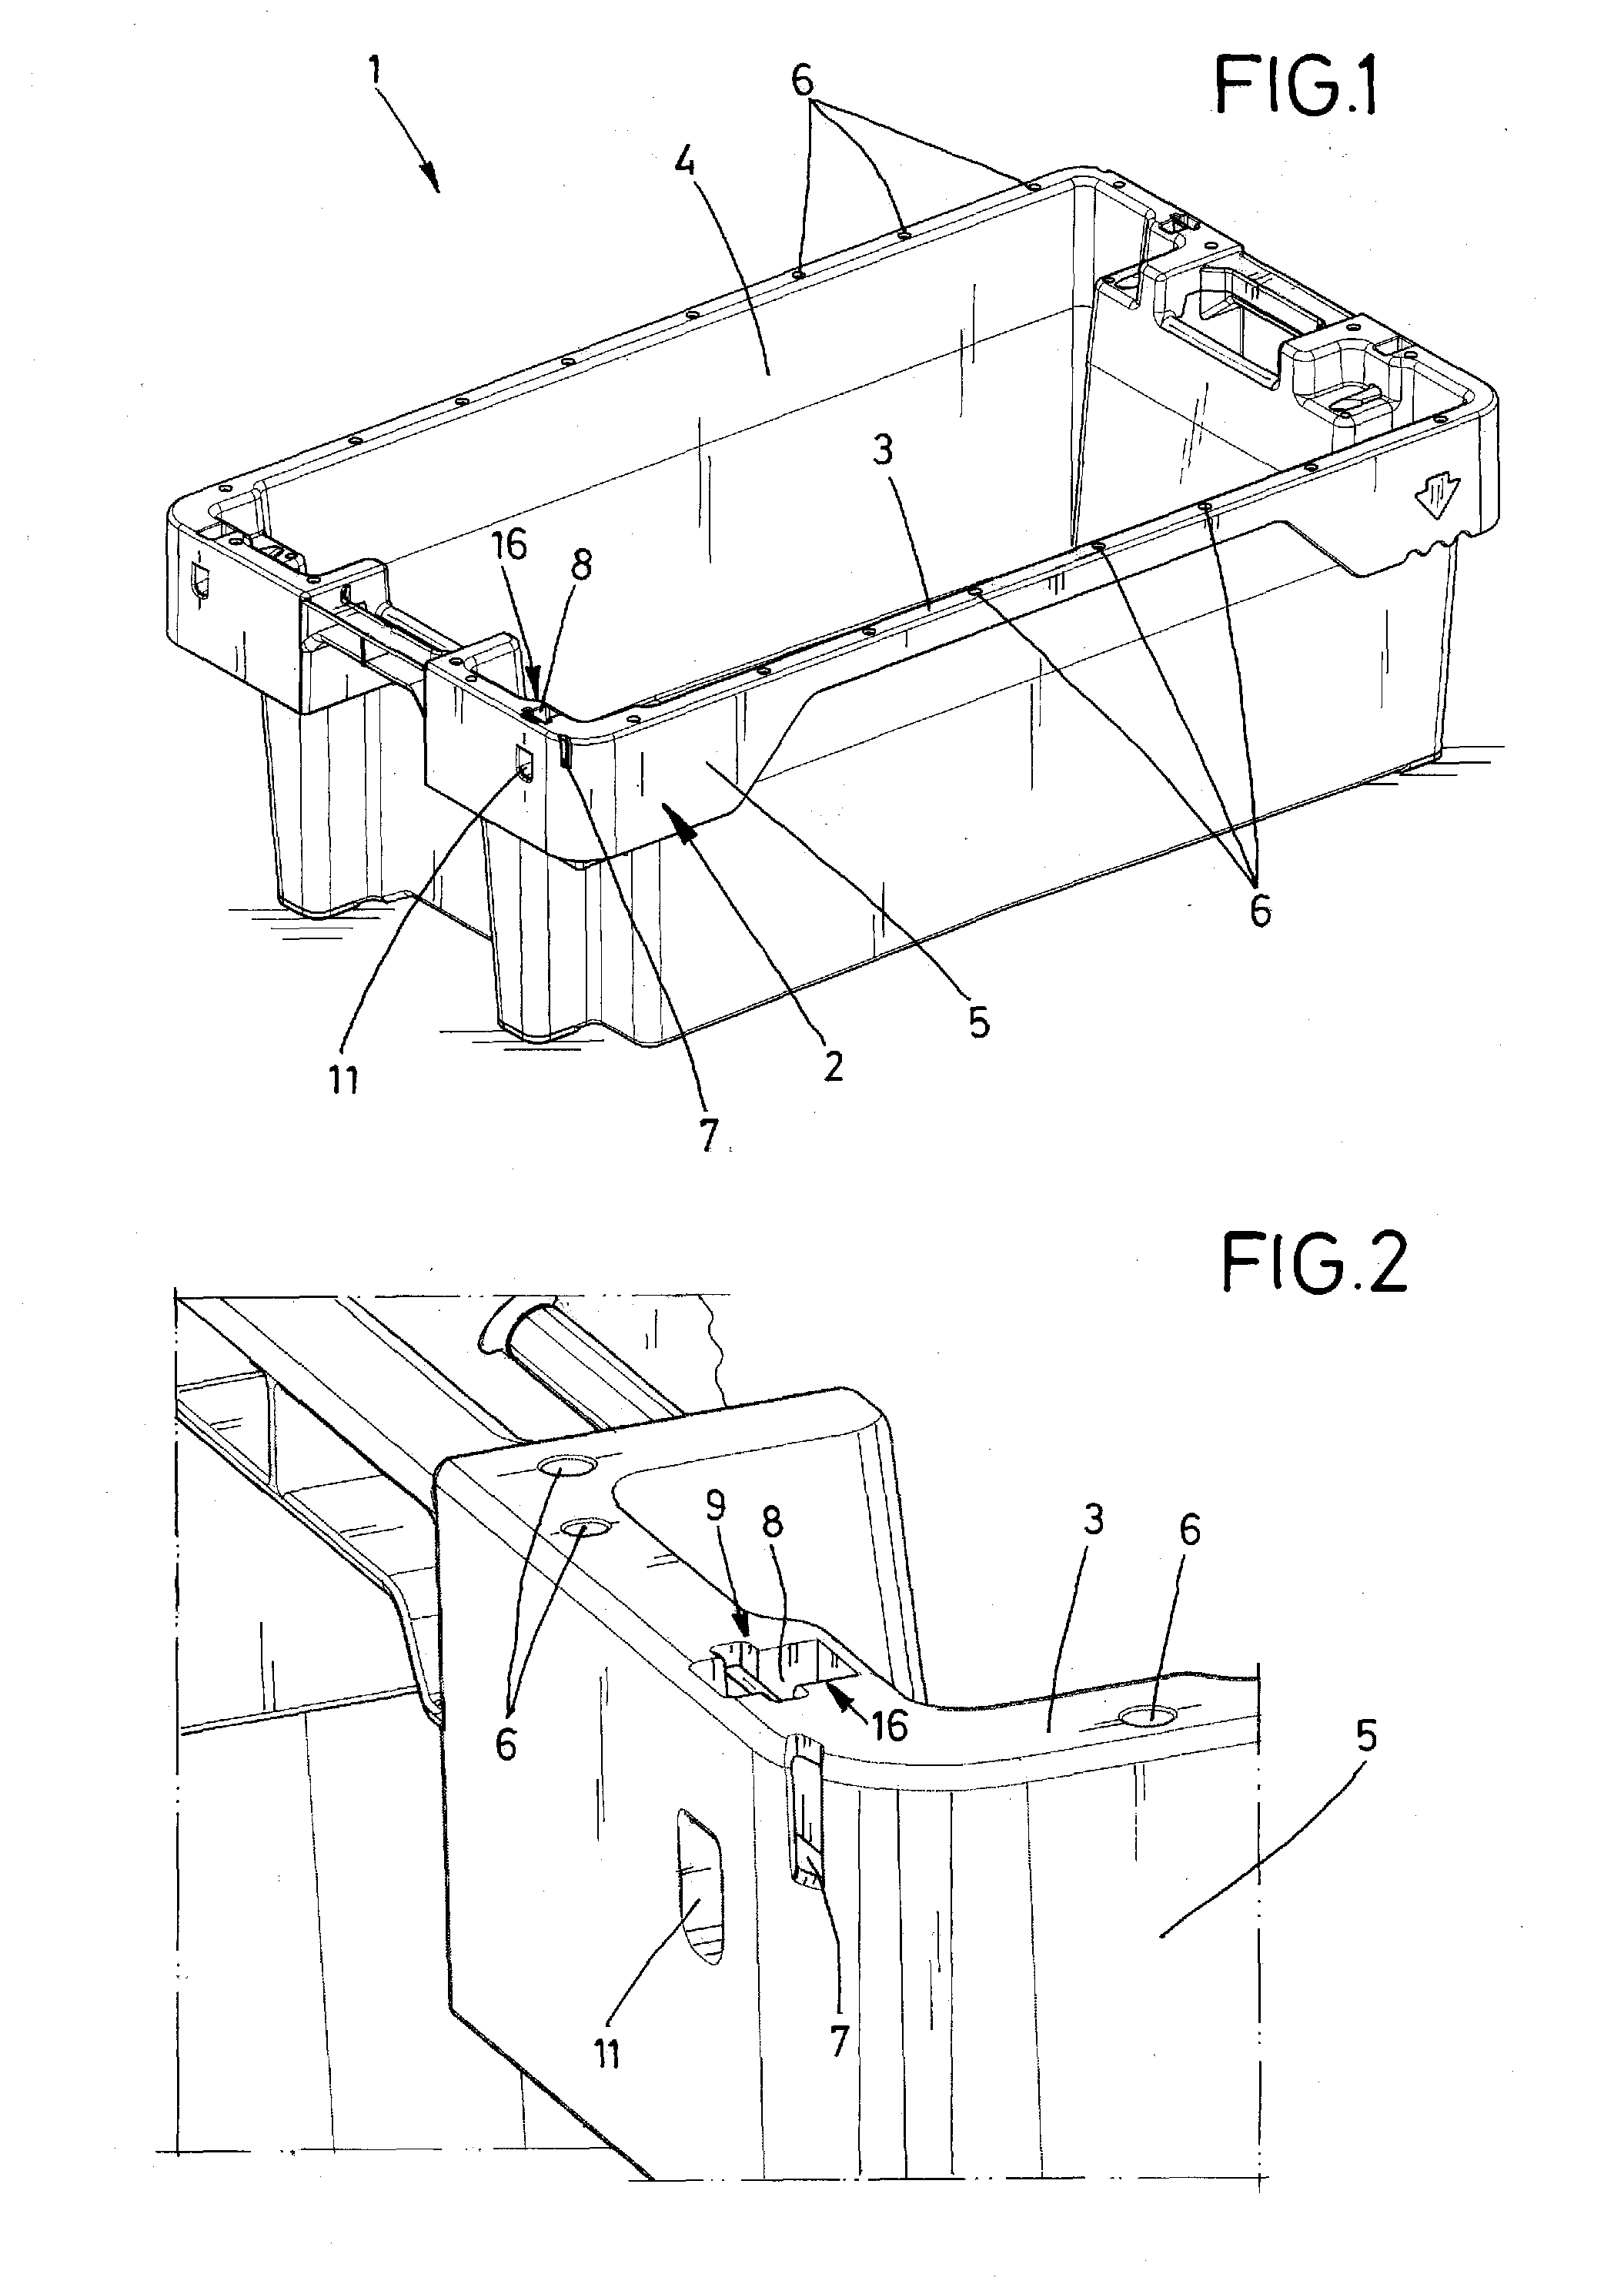 Transport container having an identification carrier